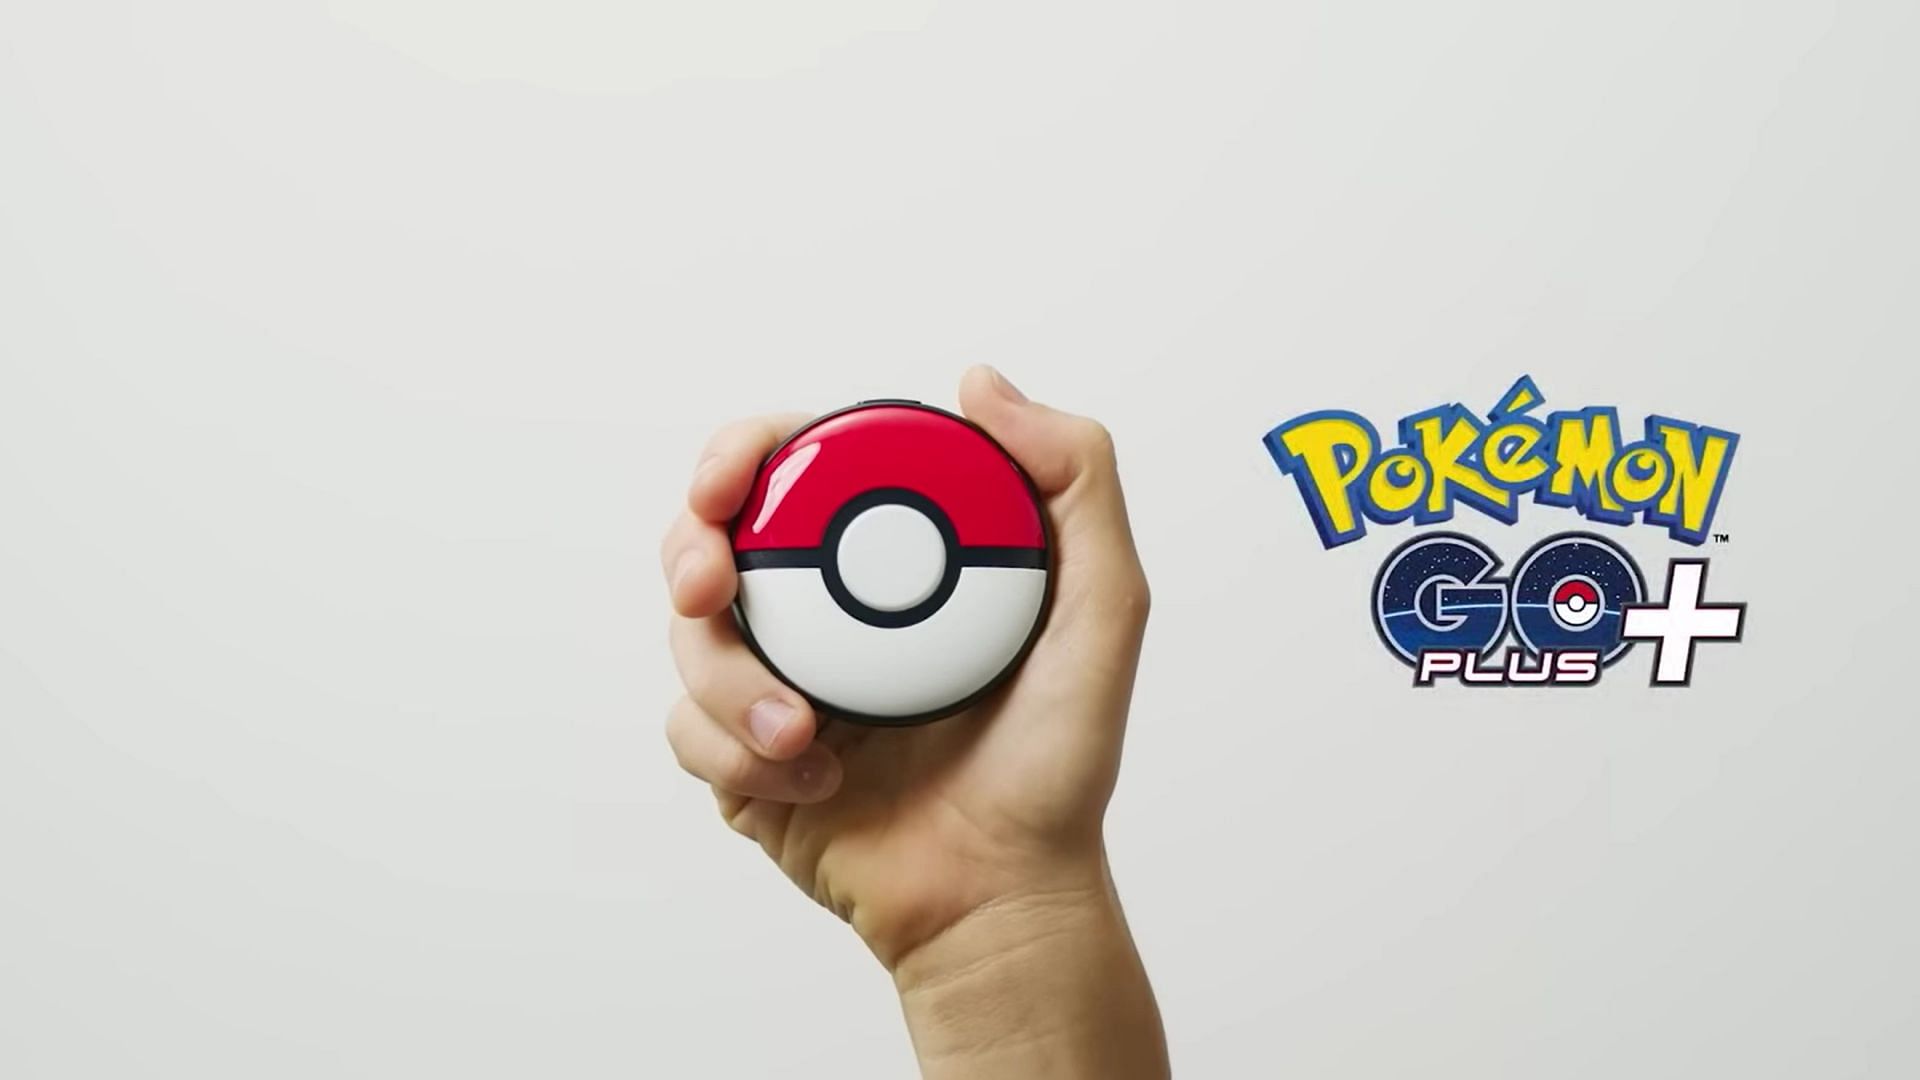 Pokemon GO Plus+ Release date, pricing, how to preorder, and more